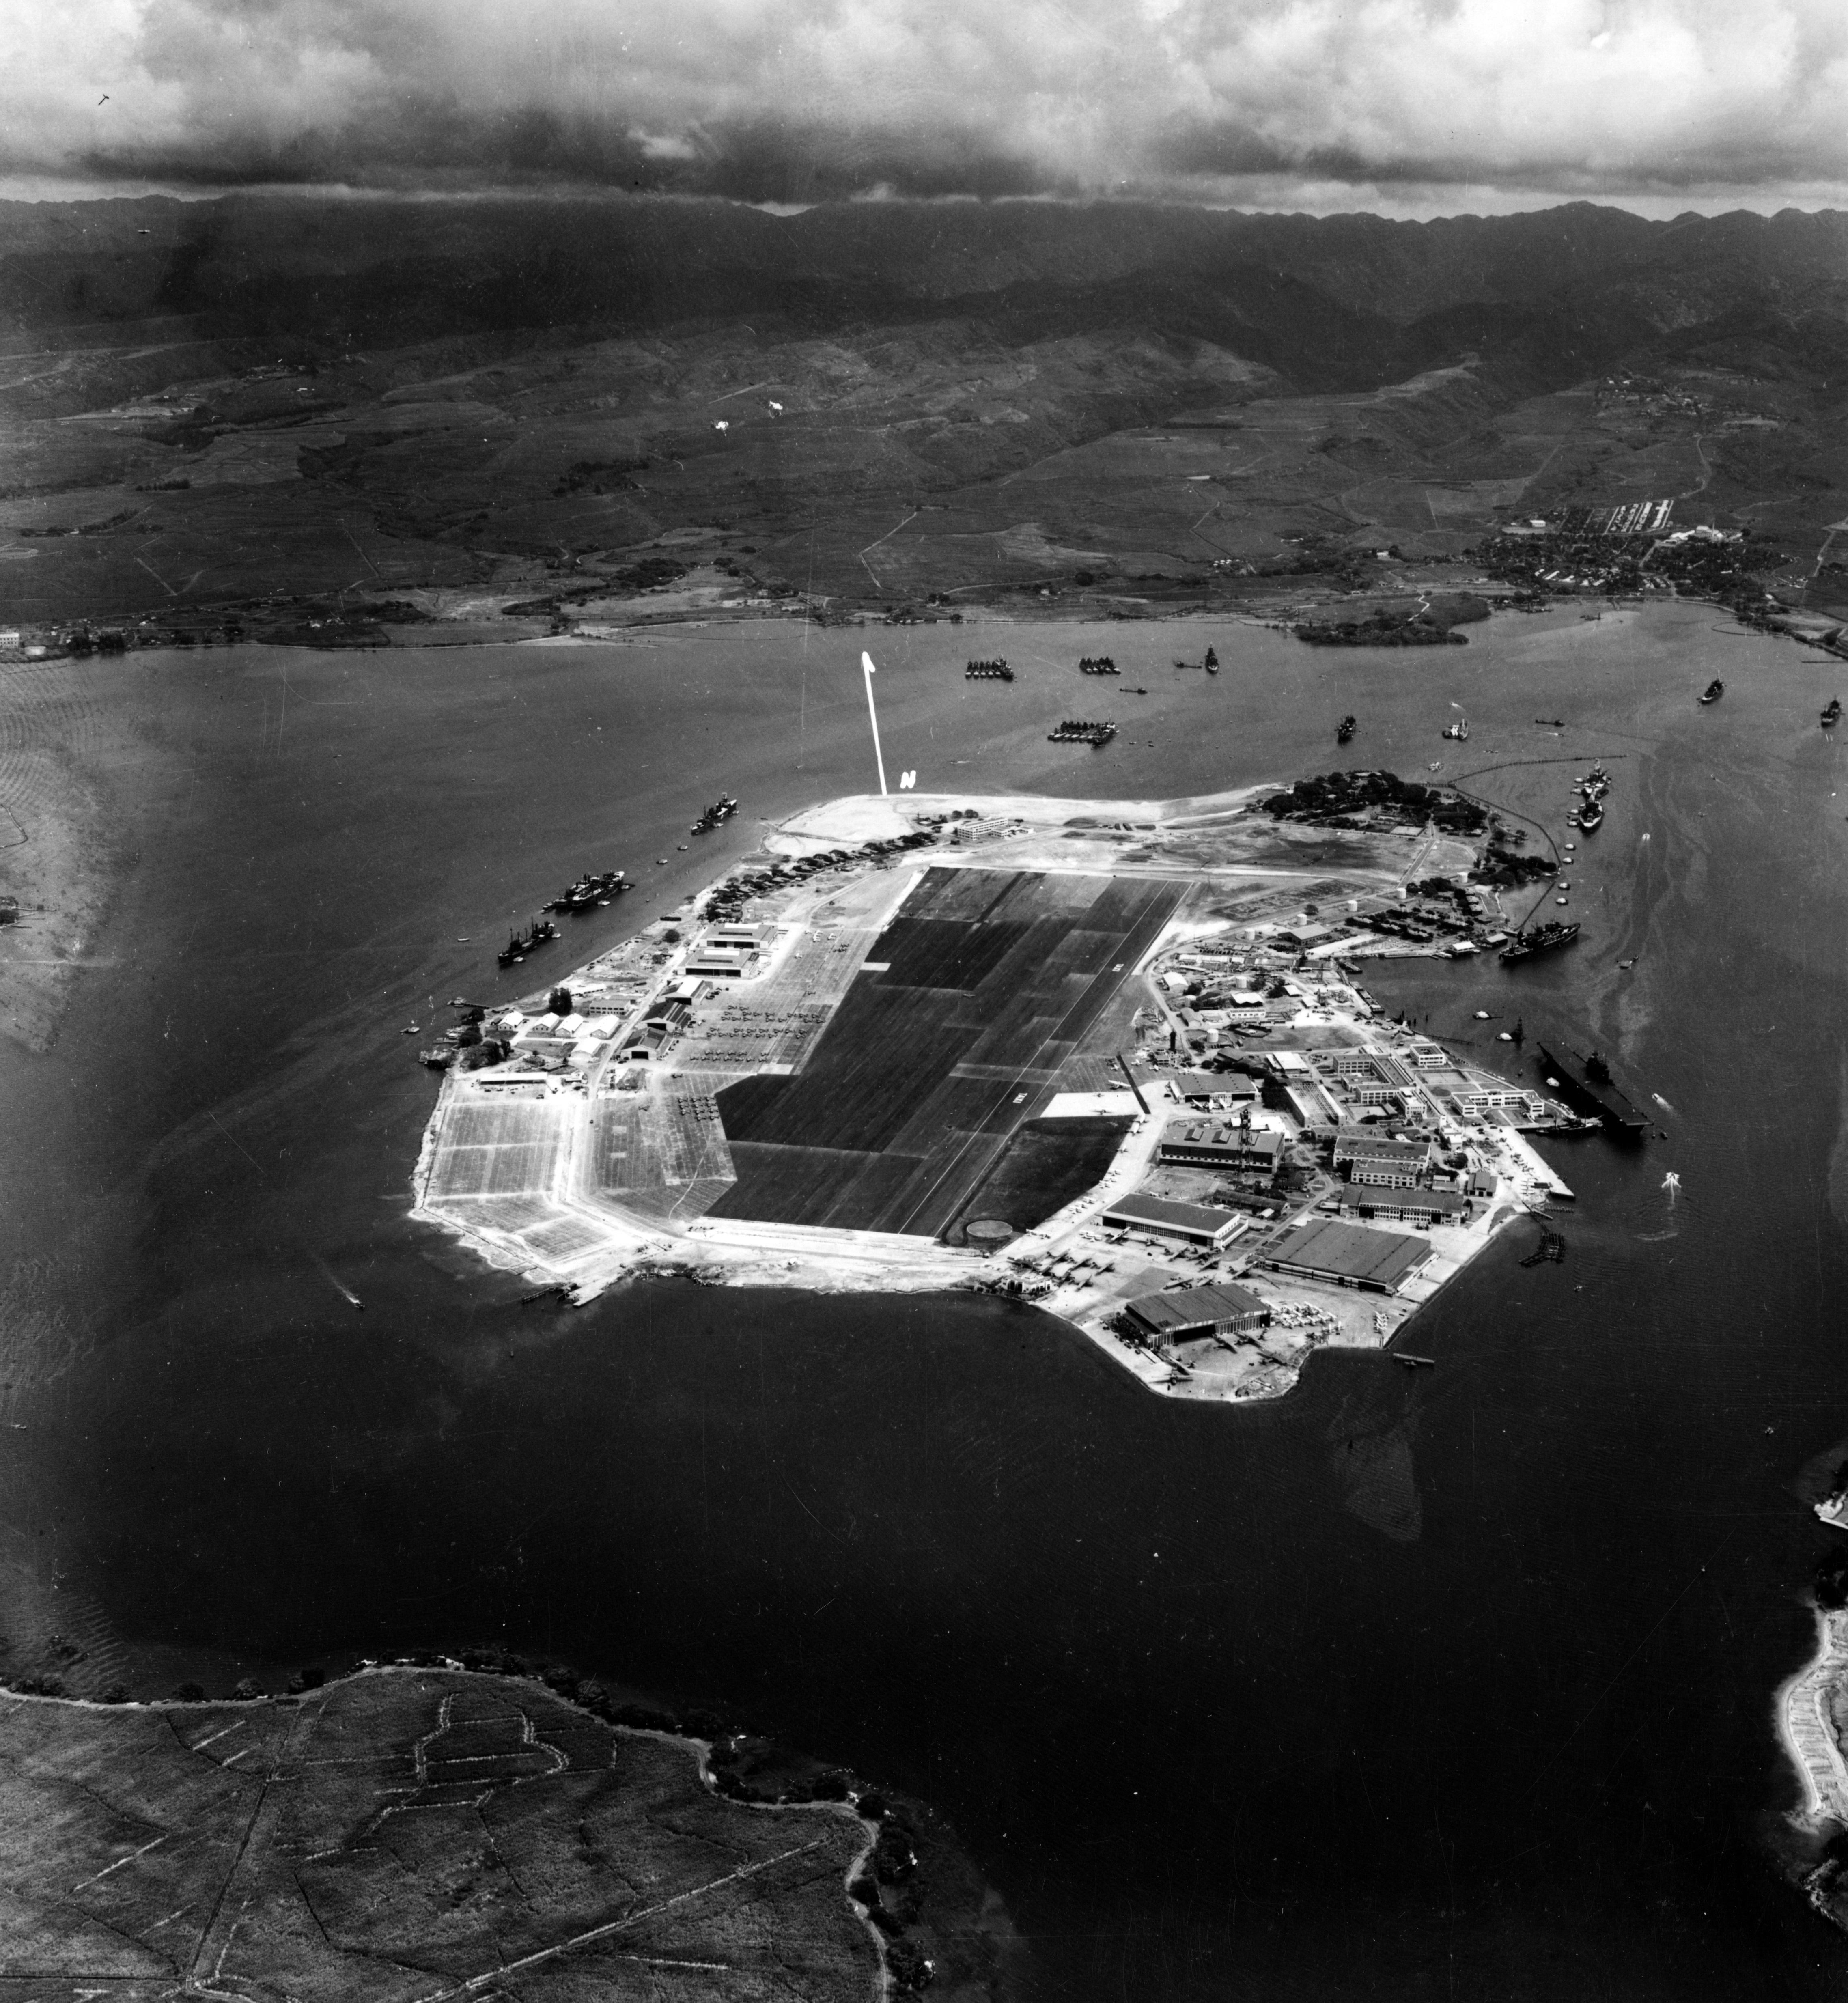 Ford Island, Pearl Harbor, Oahu, US Territory of Hawaii, Oct 10, 1941. Carrier Enterprise and Repair Ship Curtiss are moored alonfside Ford Island on the right of the photograph.